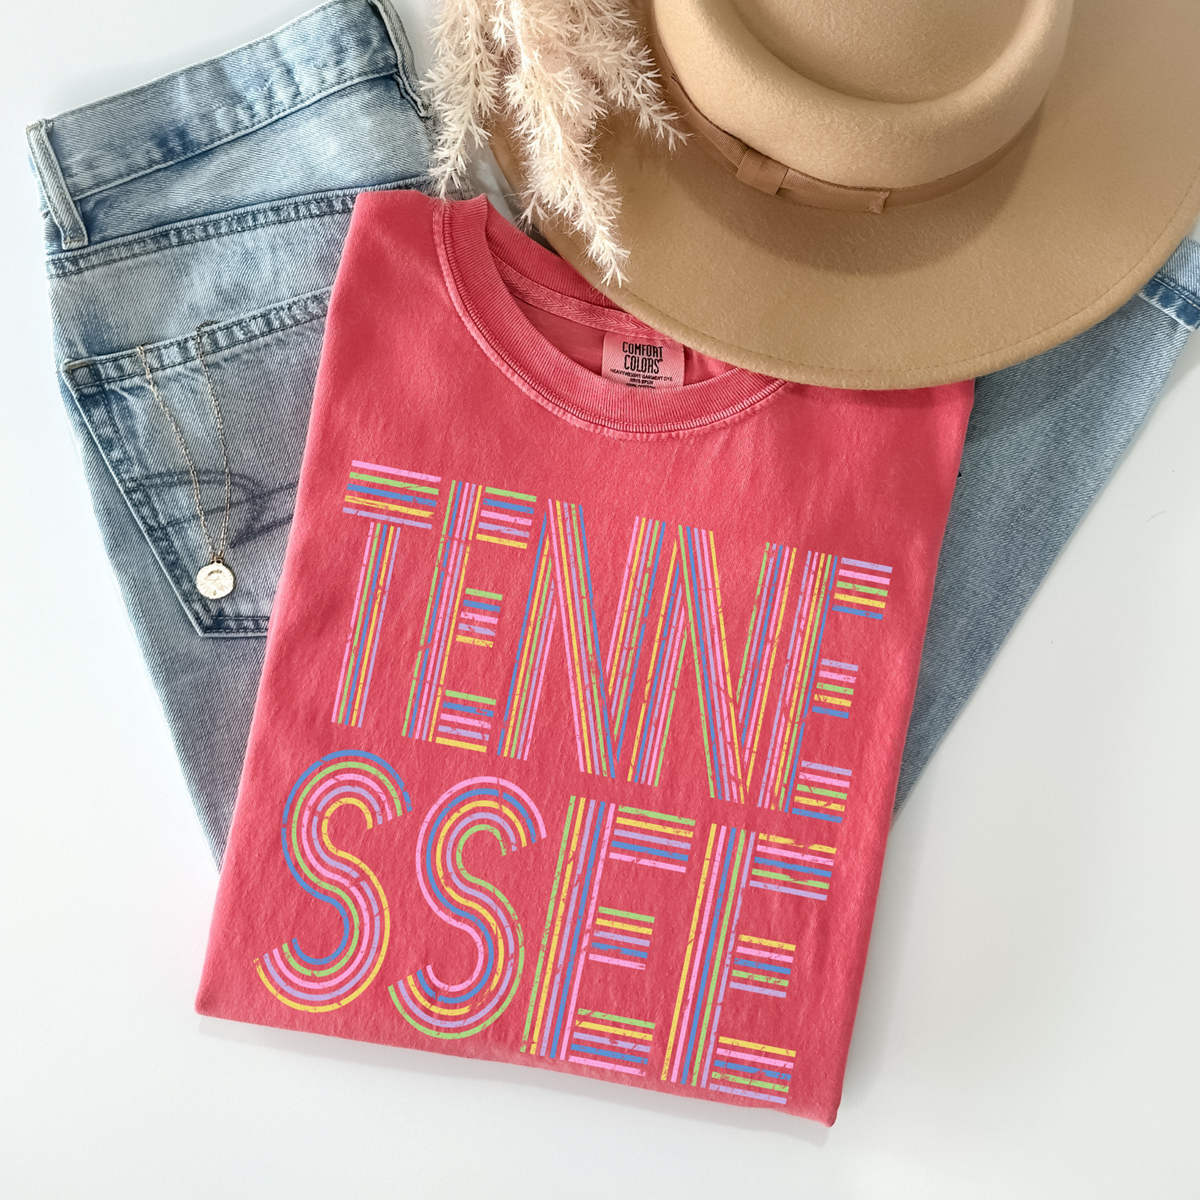 Tennessee Retro Lines Distressed in Fun Pastel Colors Digital Design, PNG